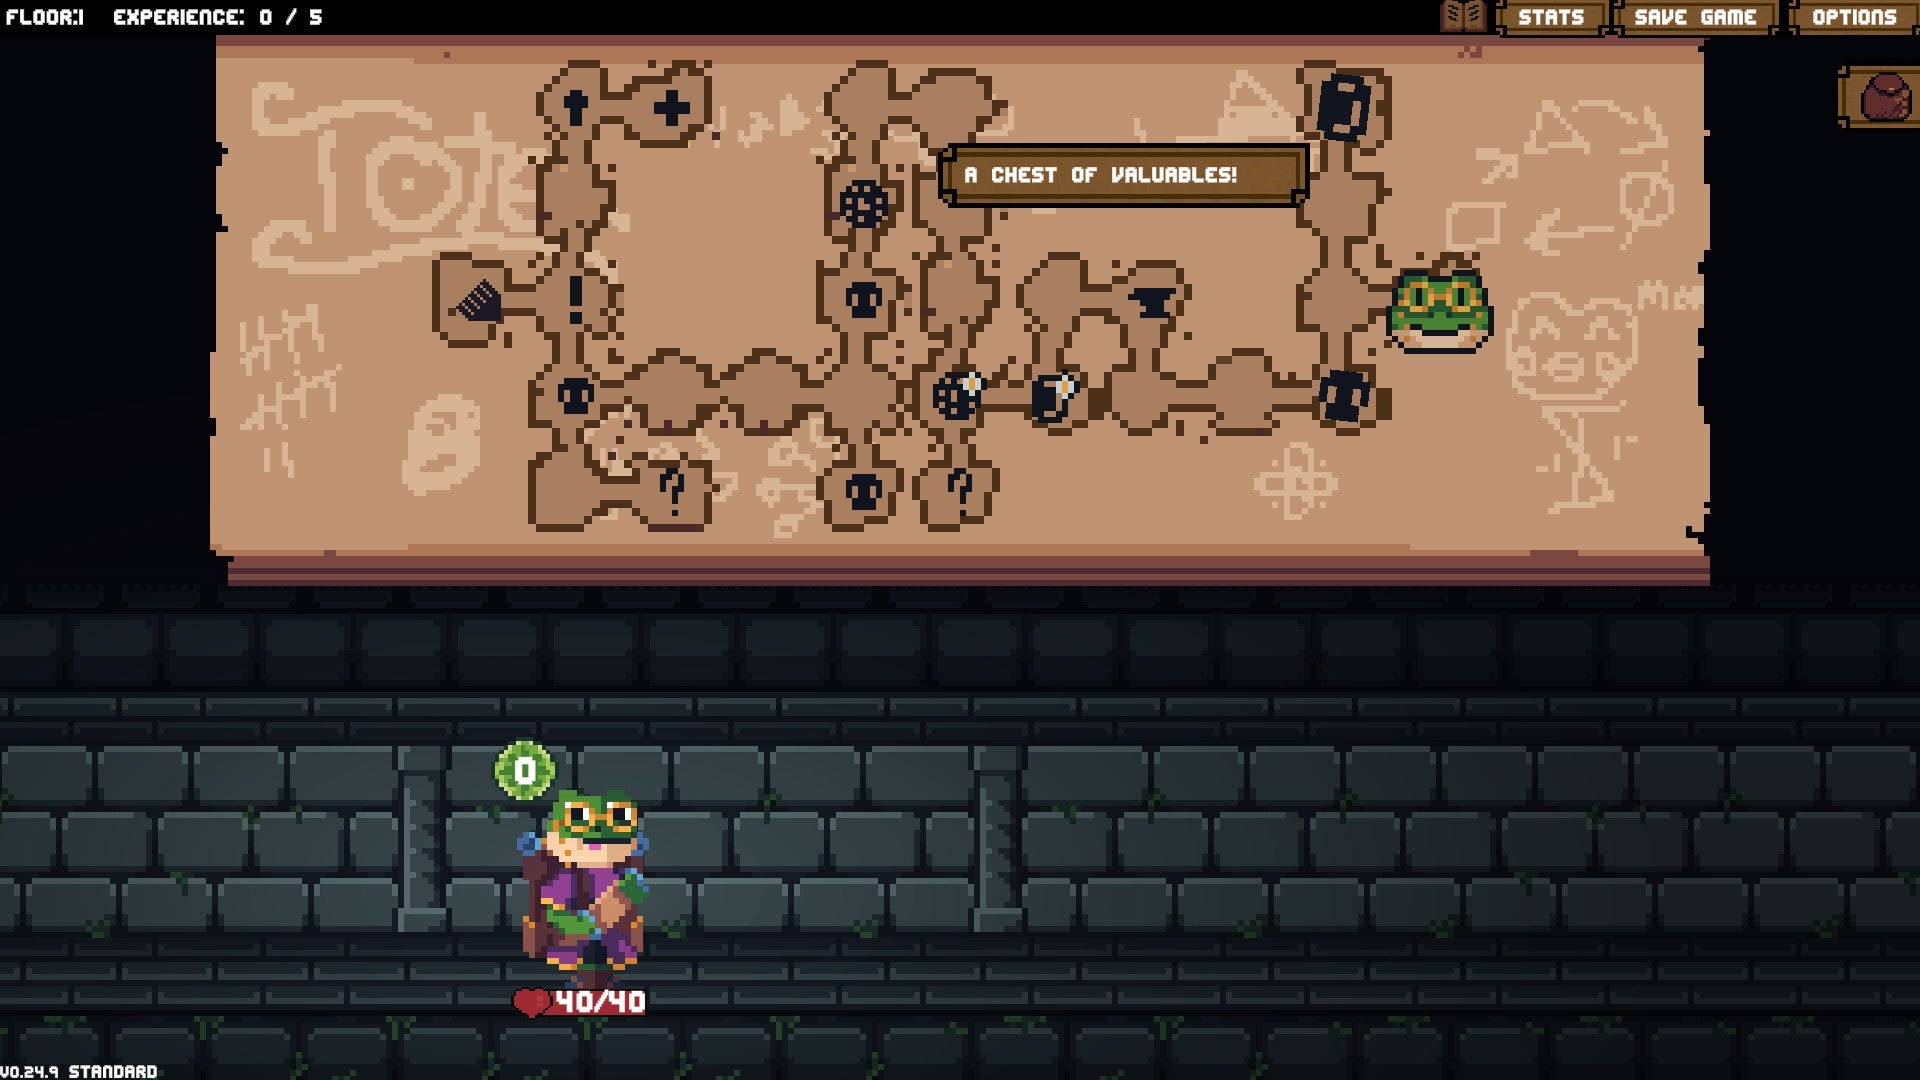 A small frog character stands below a large map showing the route through the dungeon and some of the merchants and smiths you can meet along the way.